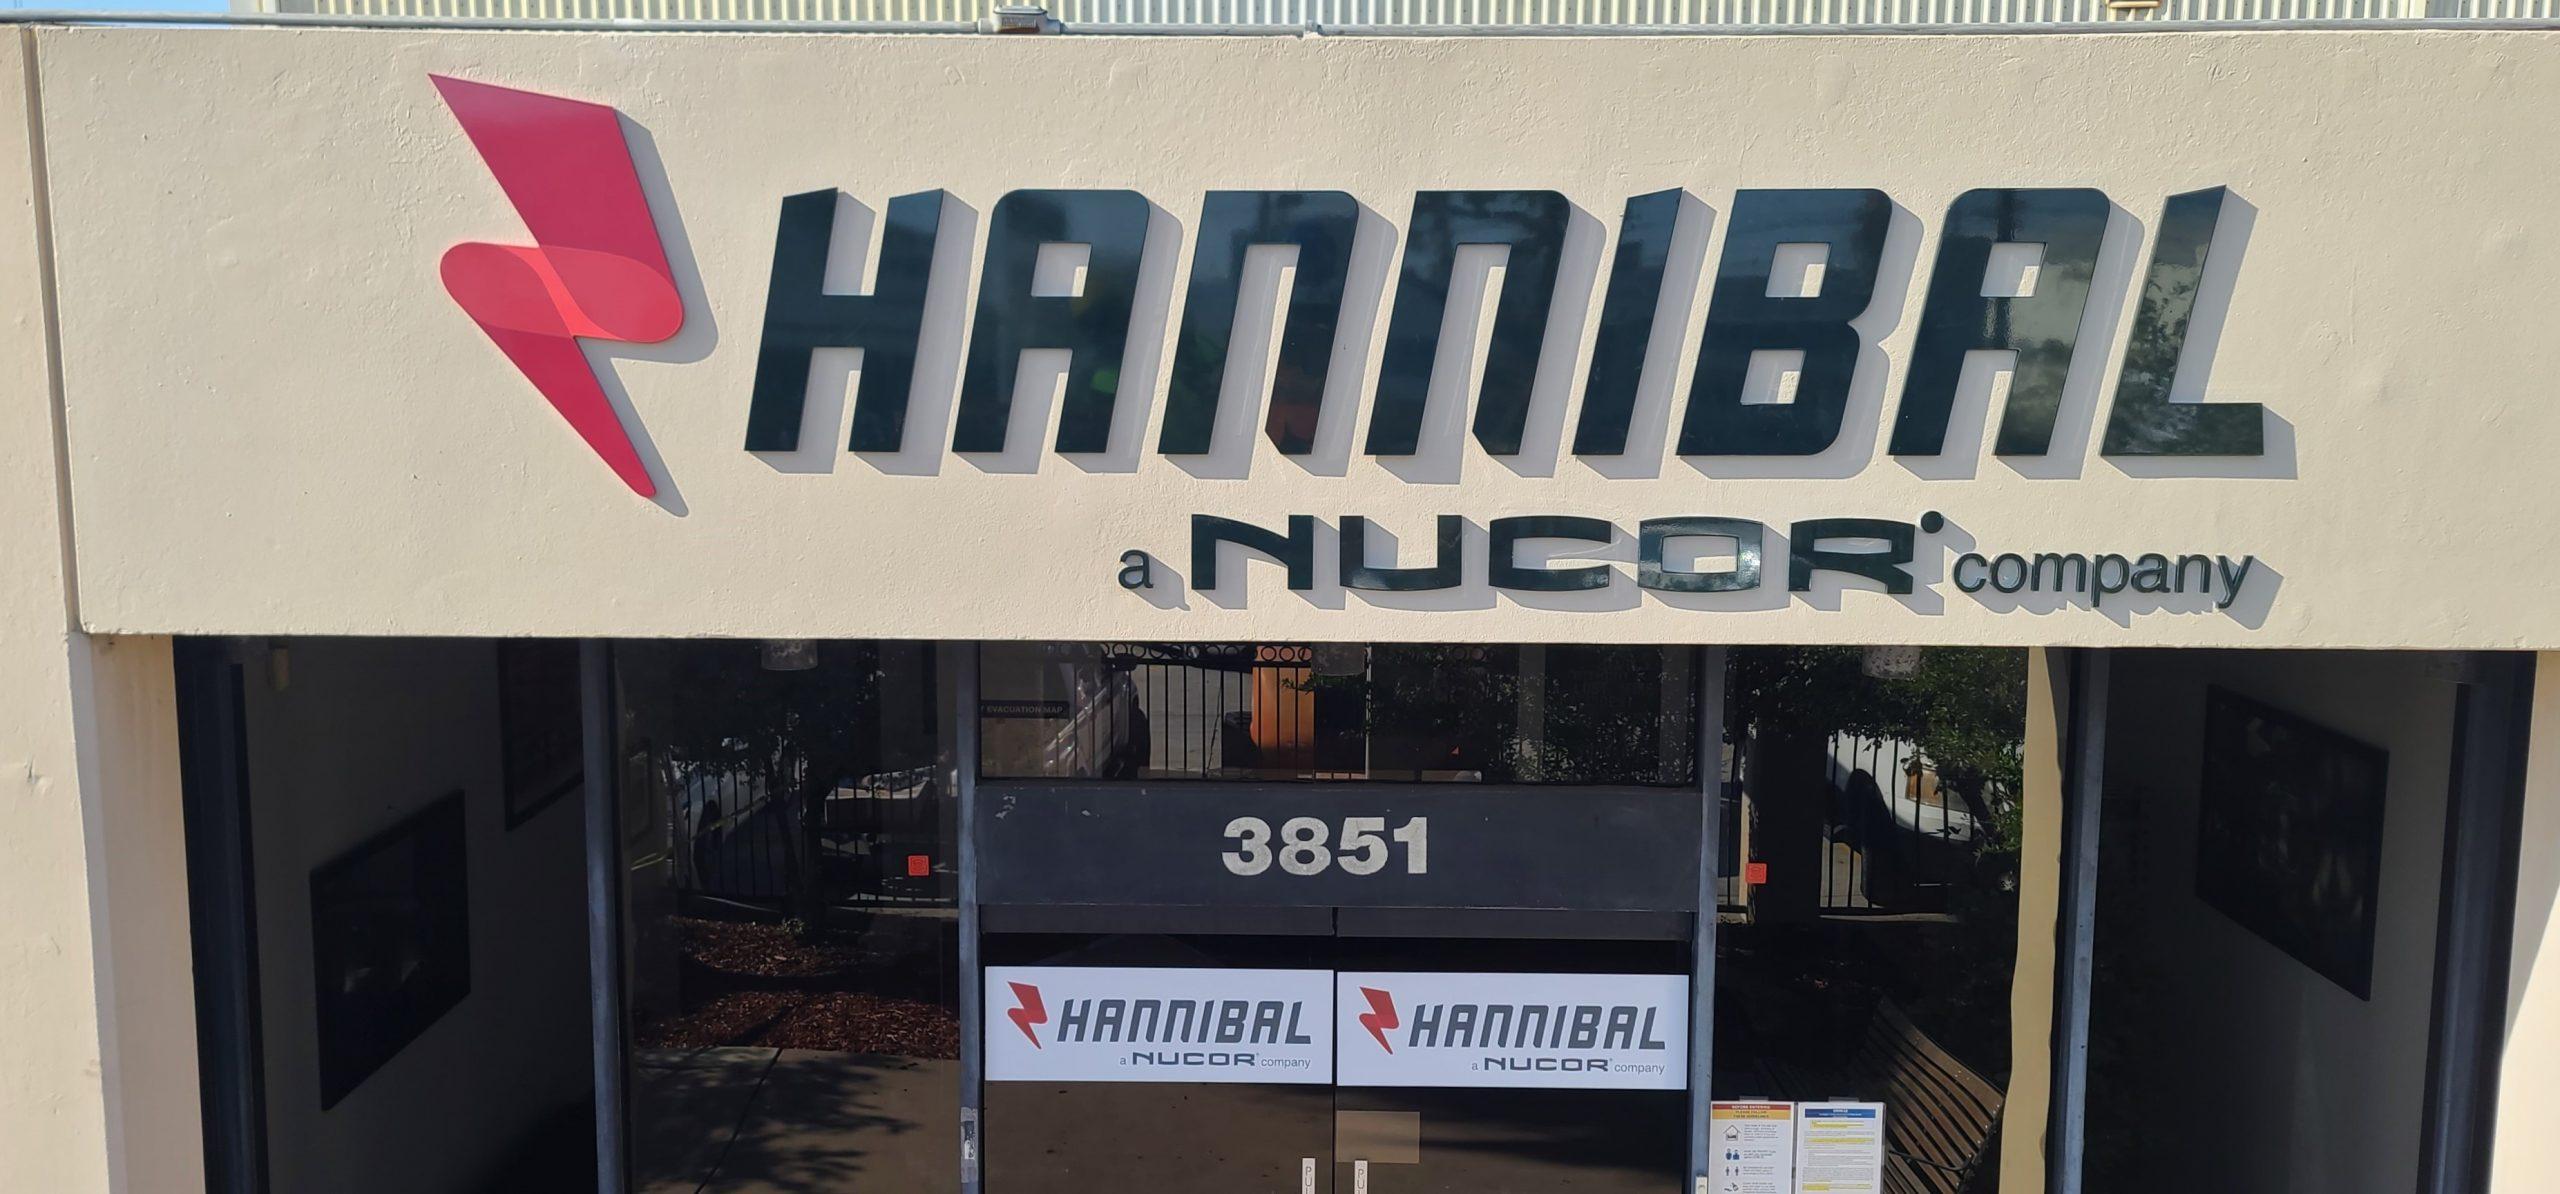 You are currently viewing Acrylic Letters and Glass Door Graphics Entrance Signs for Hannibal Nucor in Vernon